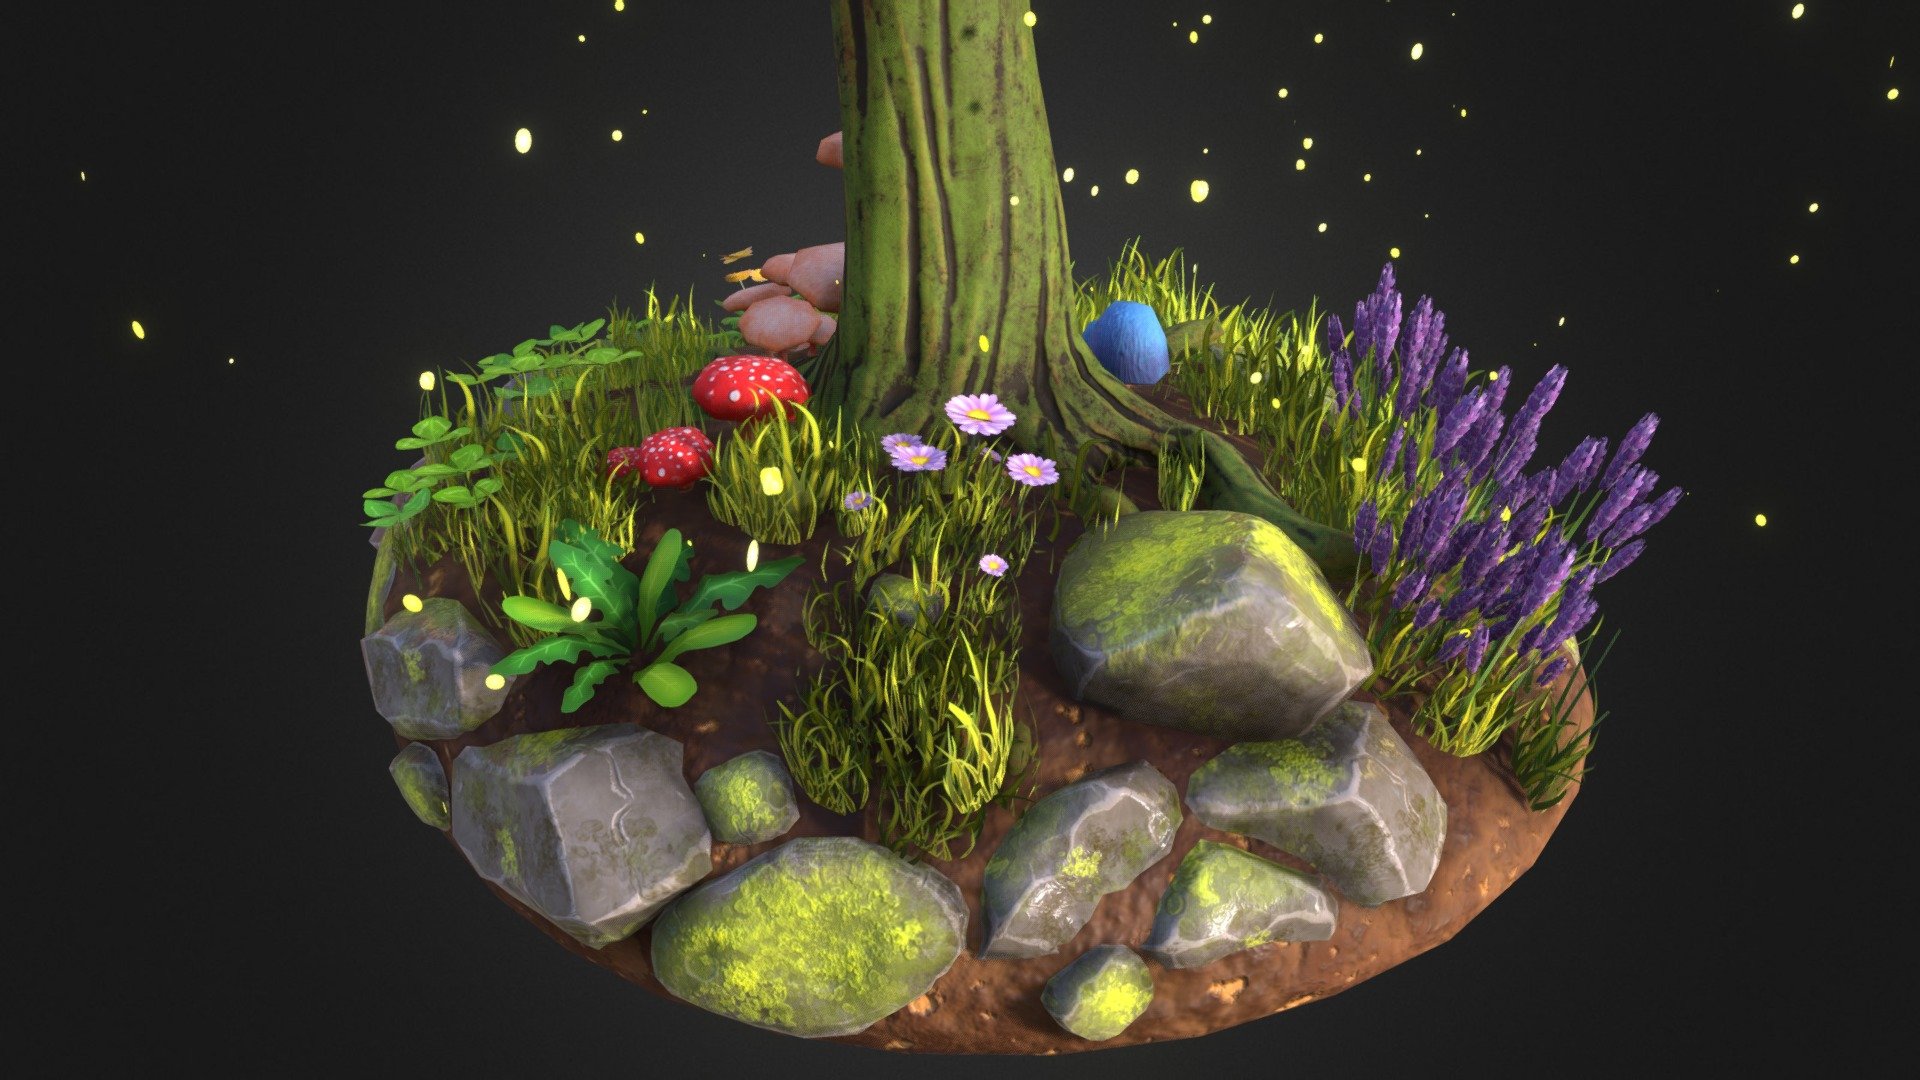 Environmental assets created for Kinoko, a university videogame project. As Environment Artist I worked on organic props to fill the magical world of Kinoko. I made this small diorama to showcase the assets outside the complessive environment.

The game is a fantasy-puzzle set in a lush colorful forest and focuses on environmental storytelling. The player will experience a relaxing walk through nature and interact with the environment to vitalize it.
Scene renderings on Artstation: https://www.artstation.com/artwork/qmZmR - Kinoko - Diorama of Environmental Assets (Set 1) - 3D model by Sara Leone (@saraleone) 3d model